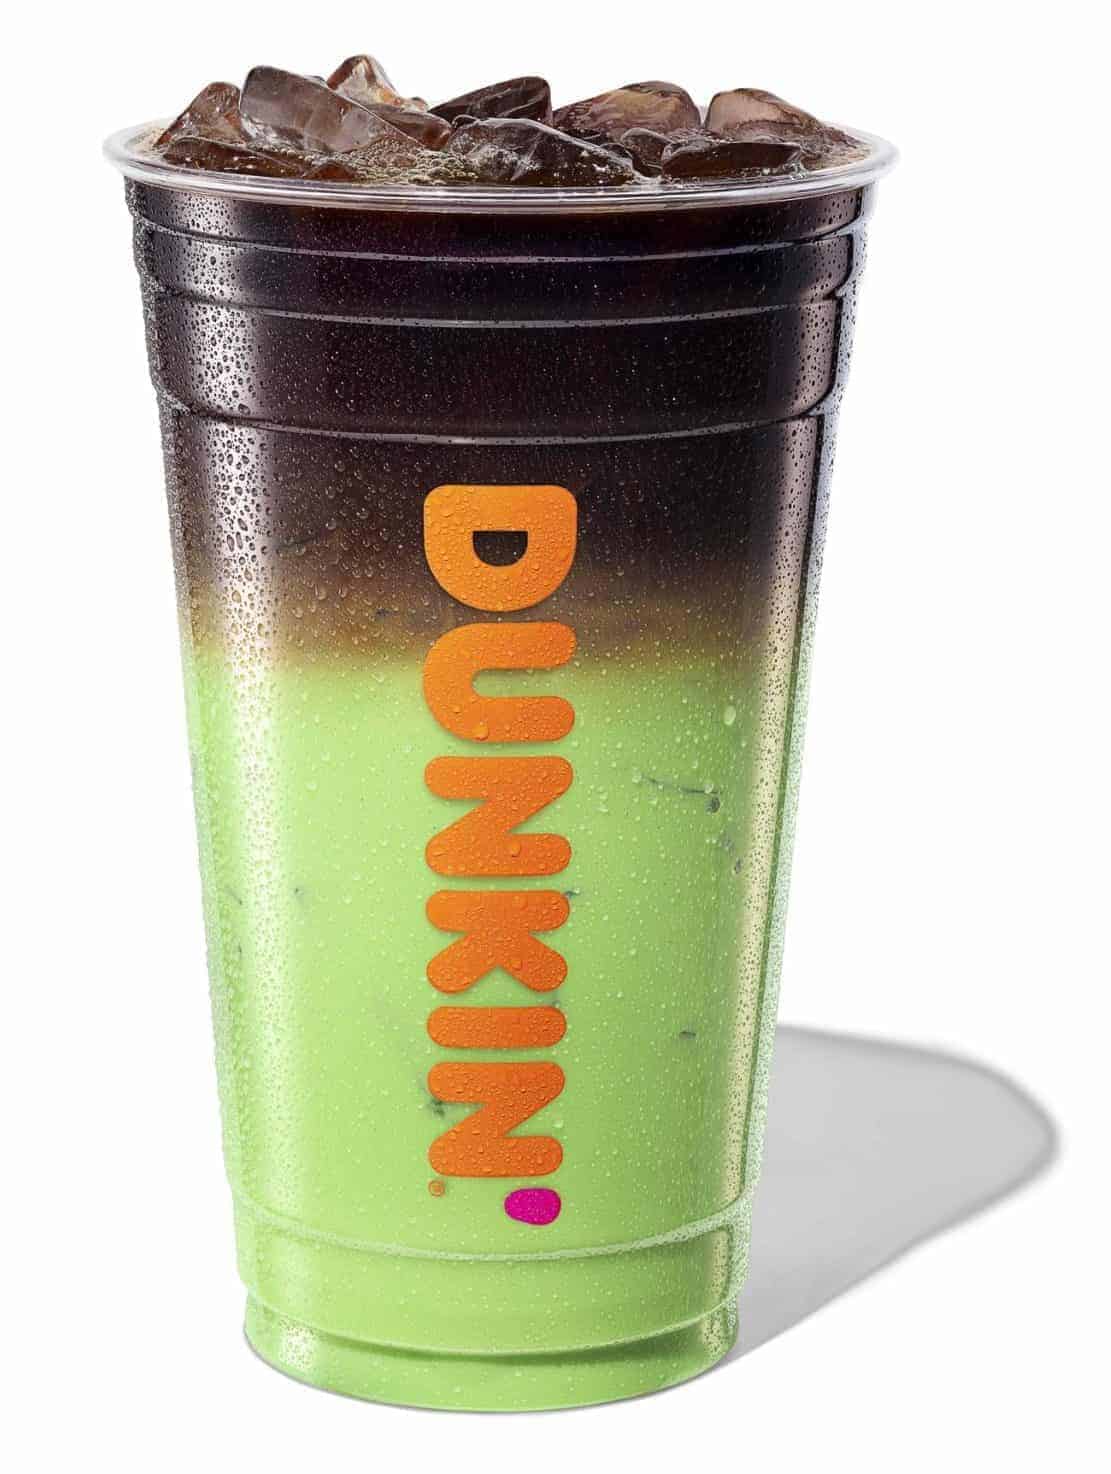 Dunkin's spring menu offers 3 cold brews and lattes Living On The Cheap